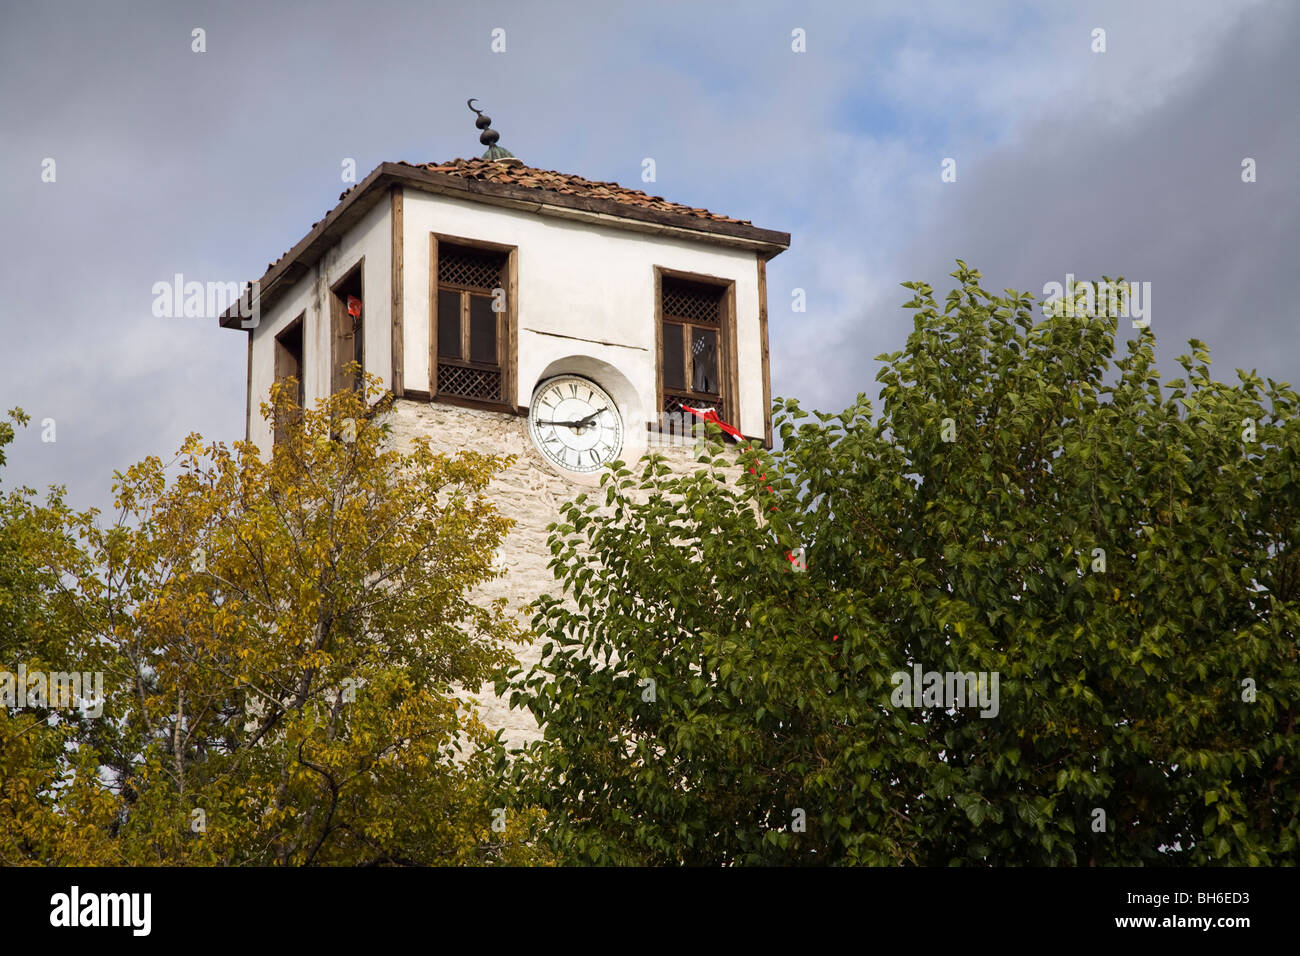 Architectural details from Safranbolu houses Turkey Stock Photo